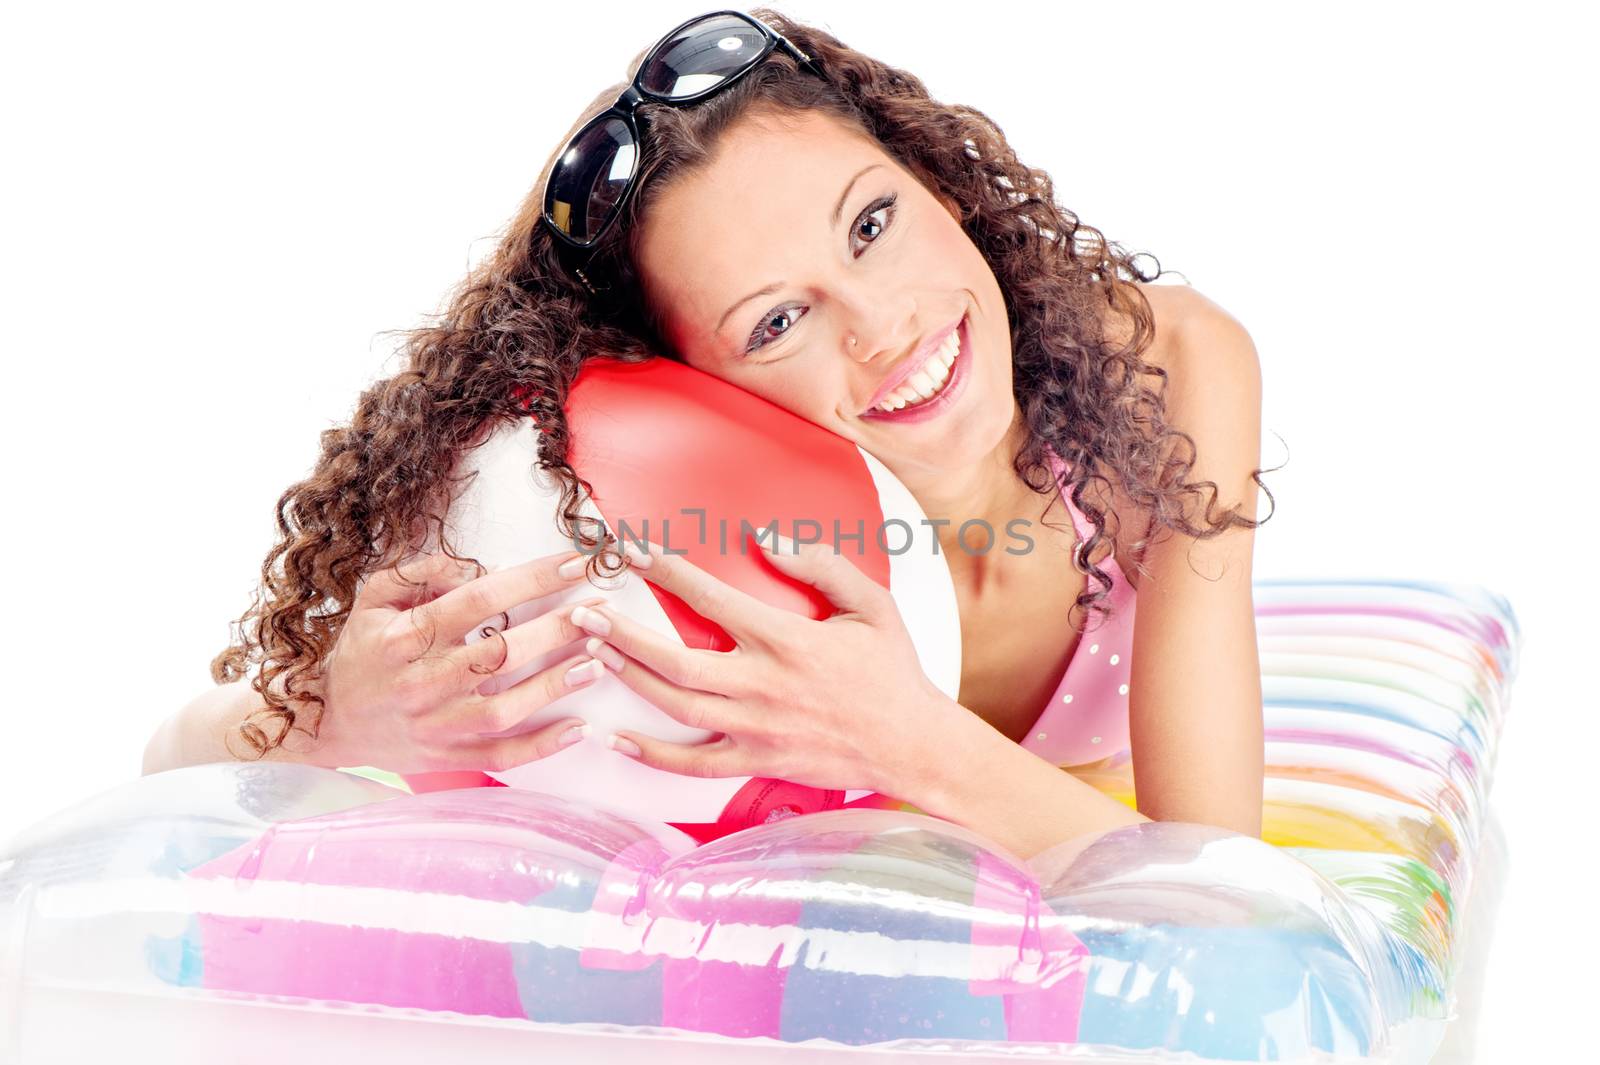 Smiled curl girl with sun glasses in hair, laying air mattress and holding the ball, isolated on white